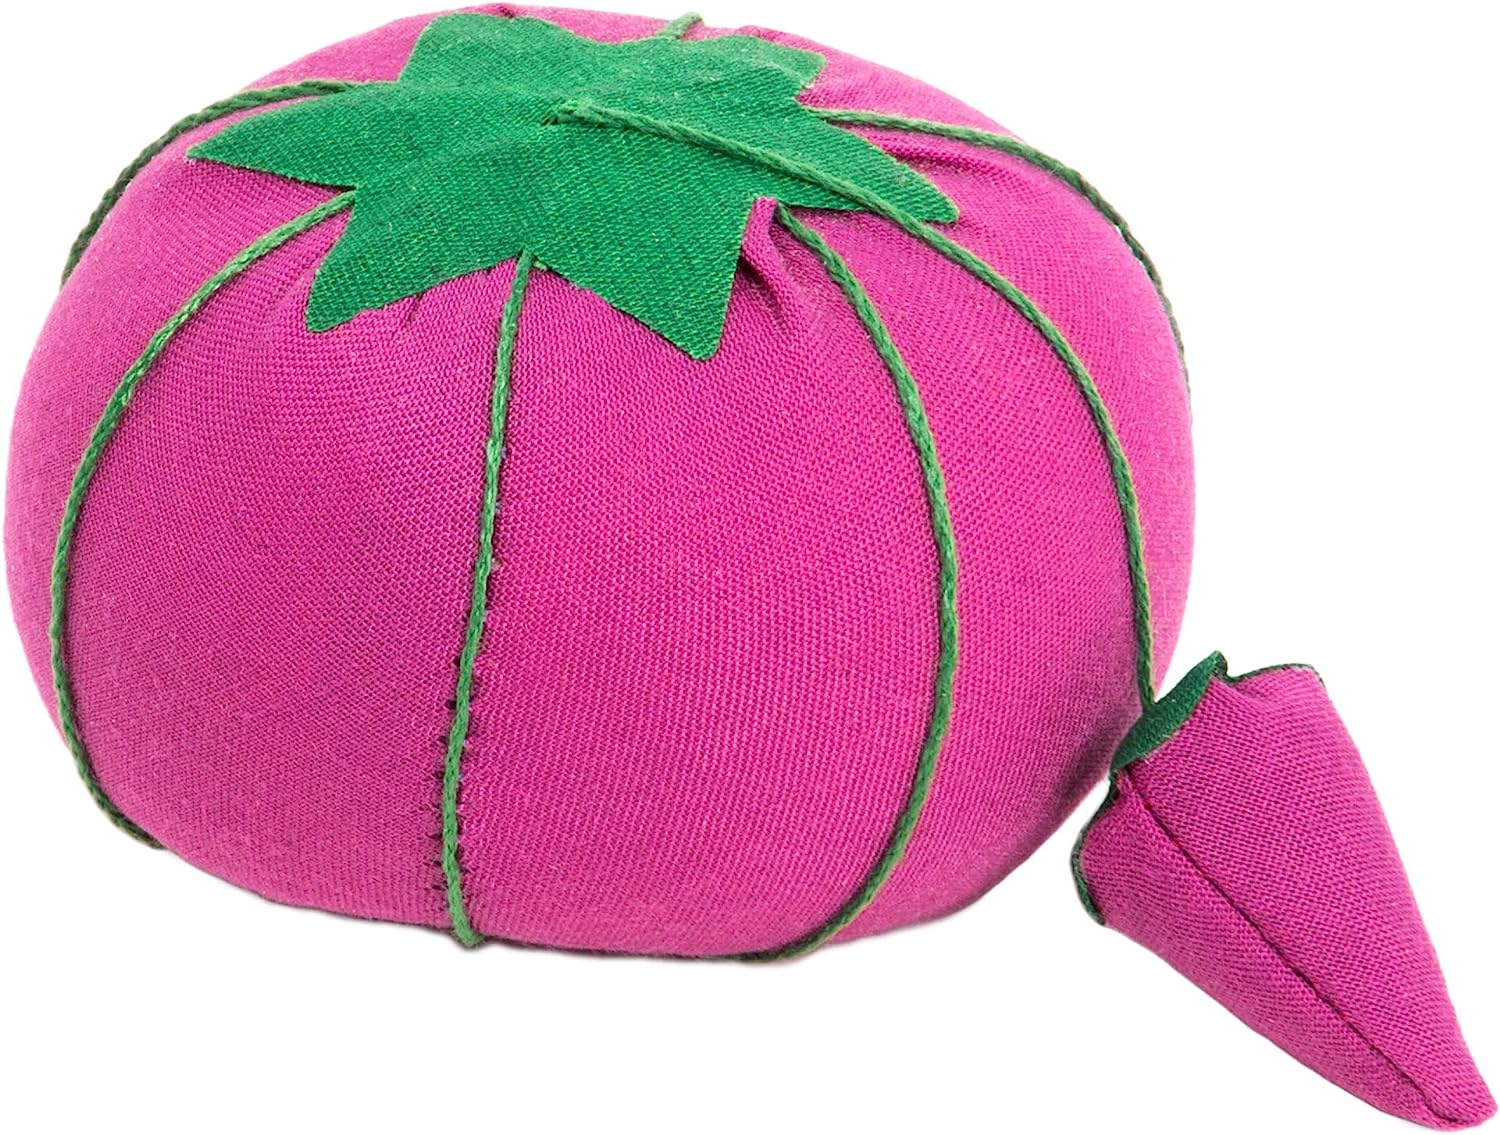 Dritz S101 Tomato Pin Cushion Notion, Lime, Pink, [...]